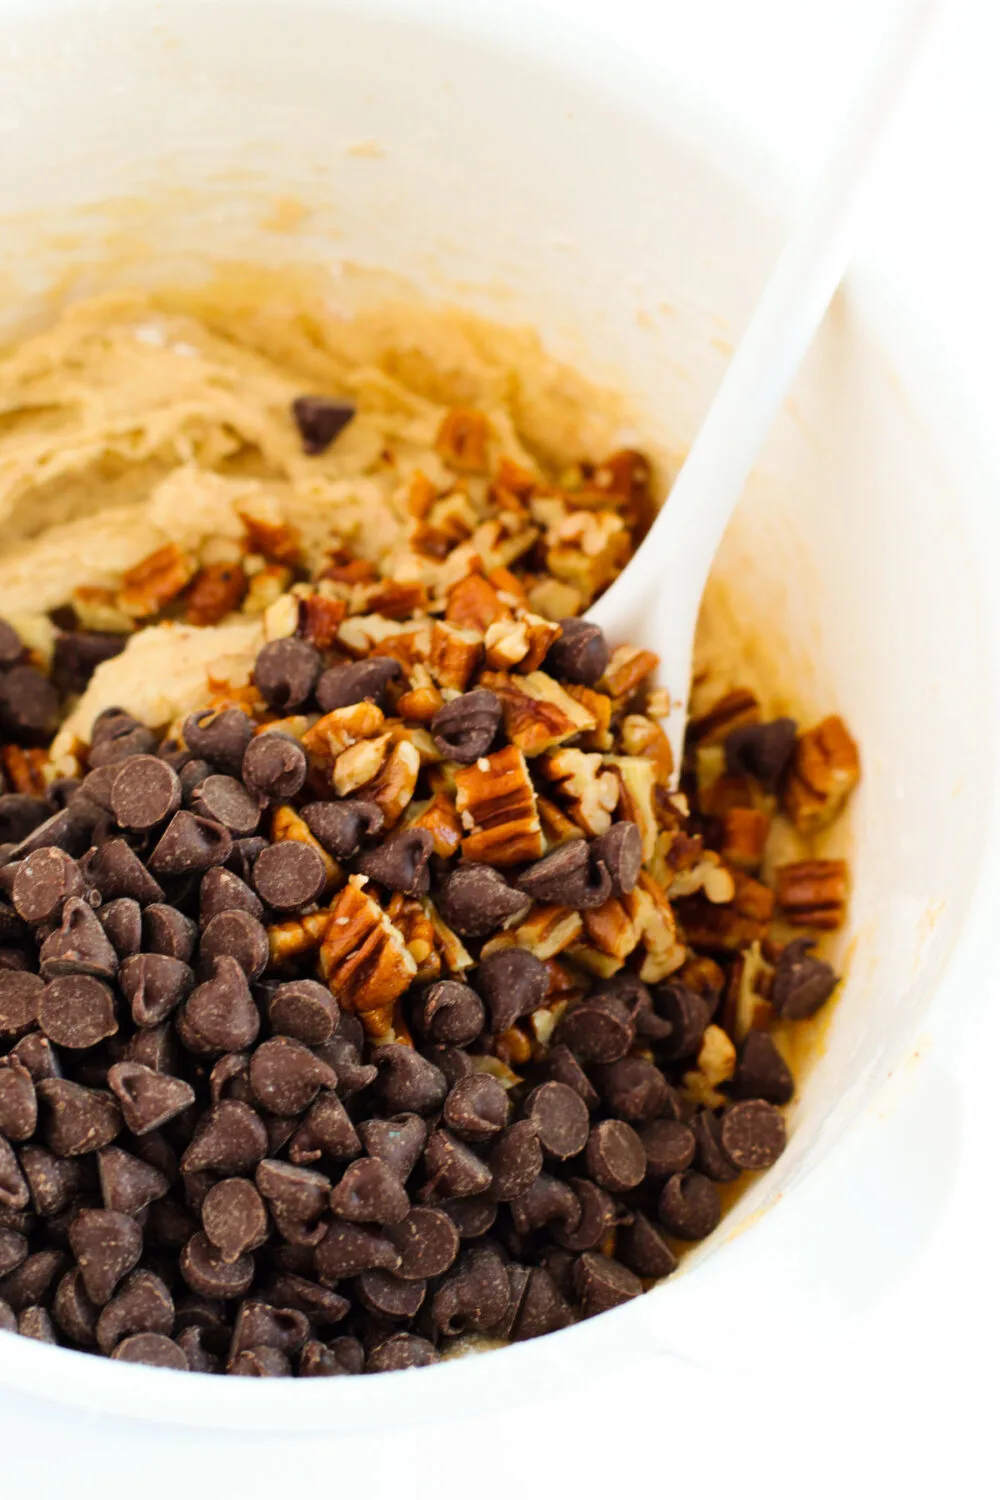 Chocolate chips and pecans in cookie batter. 